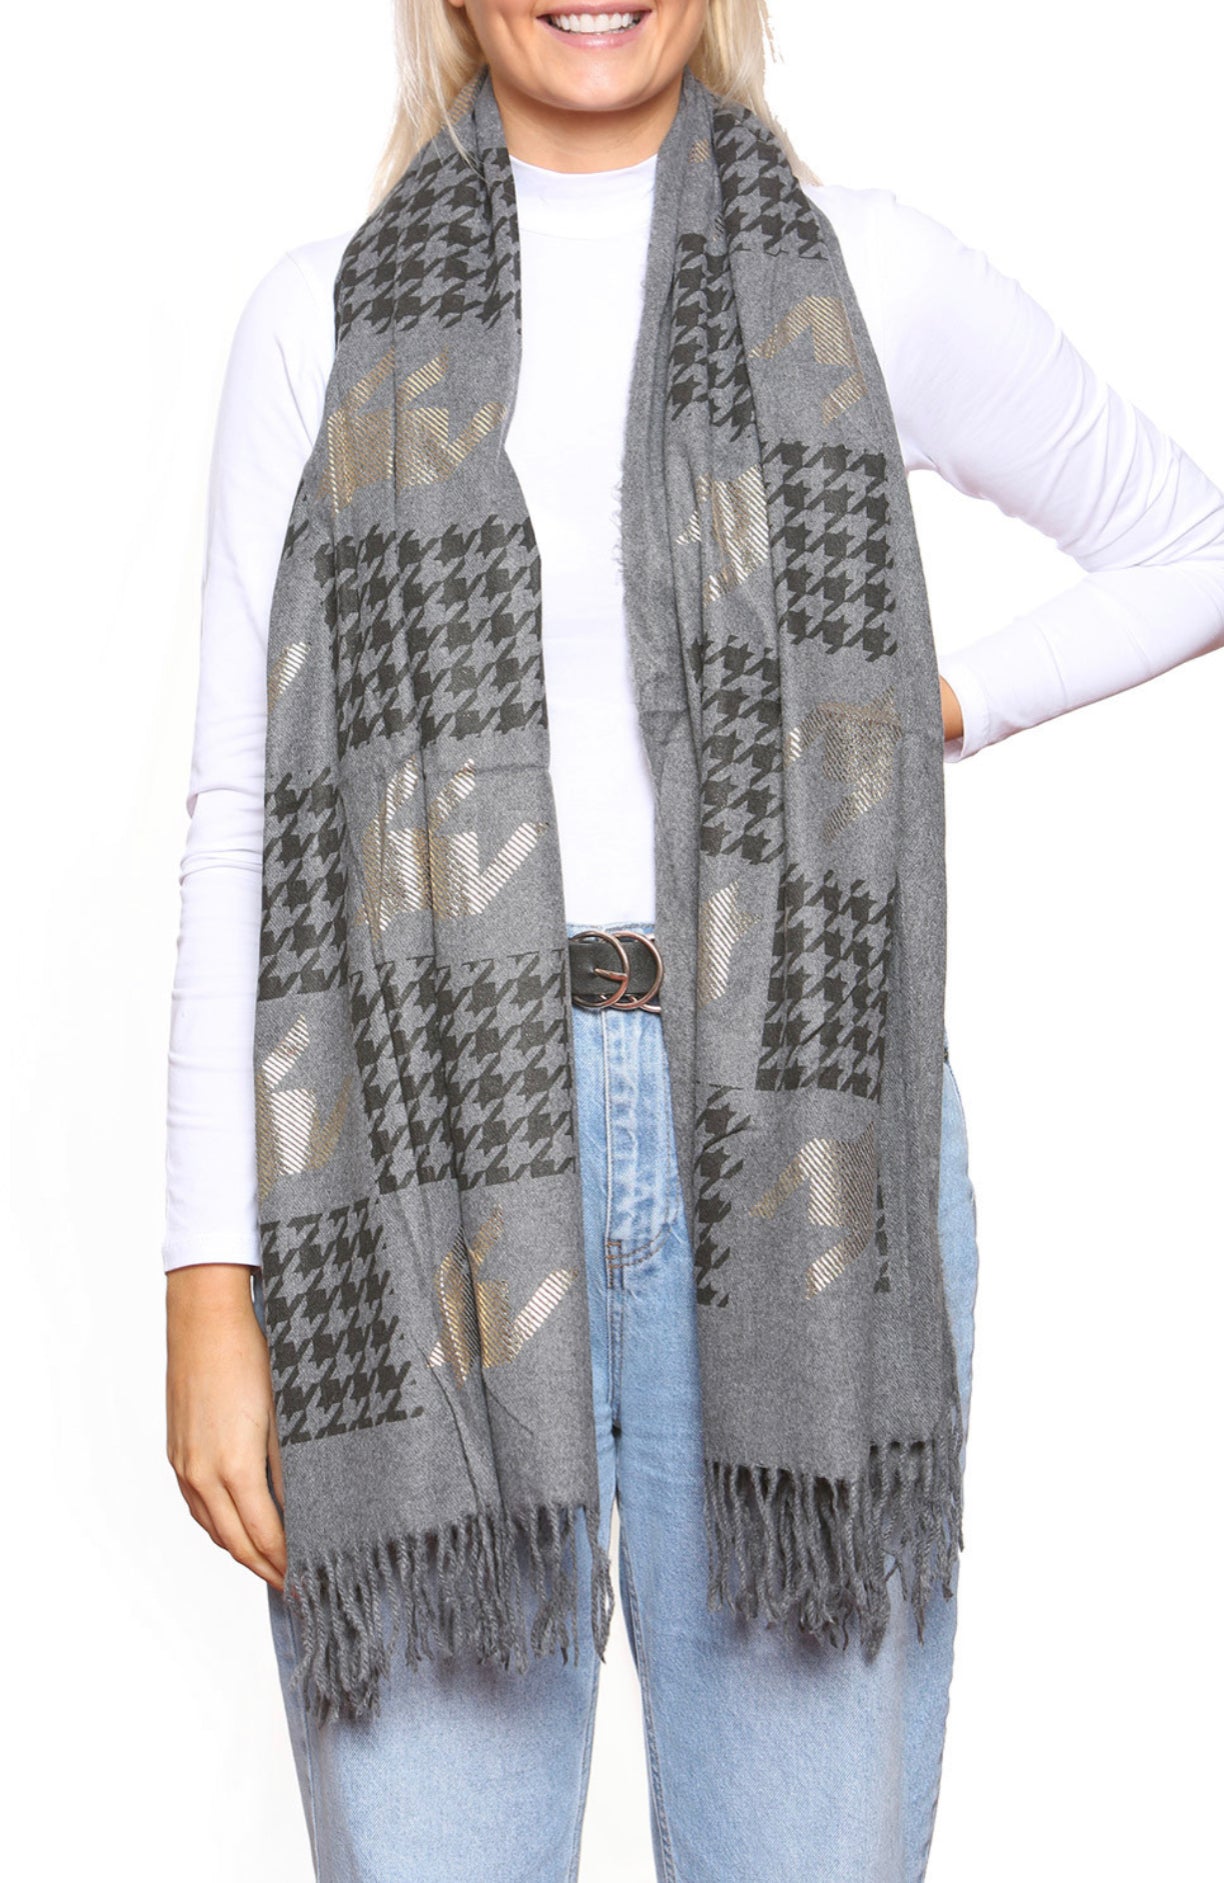 GREY Metallic Houndstooth Knitted Shawl